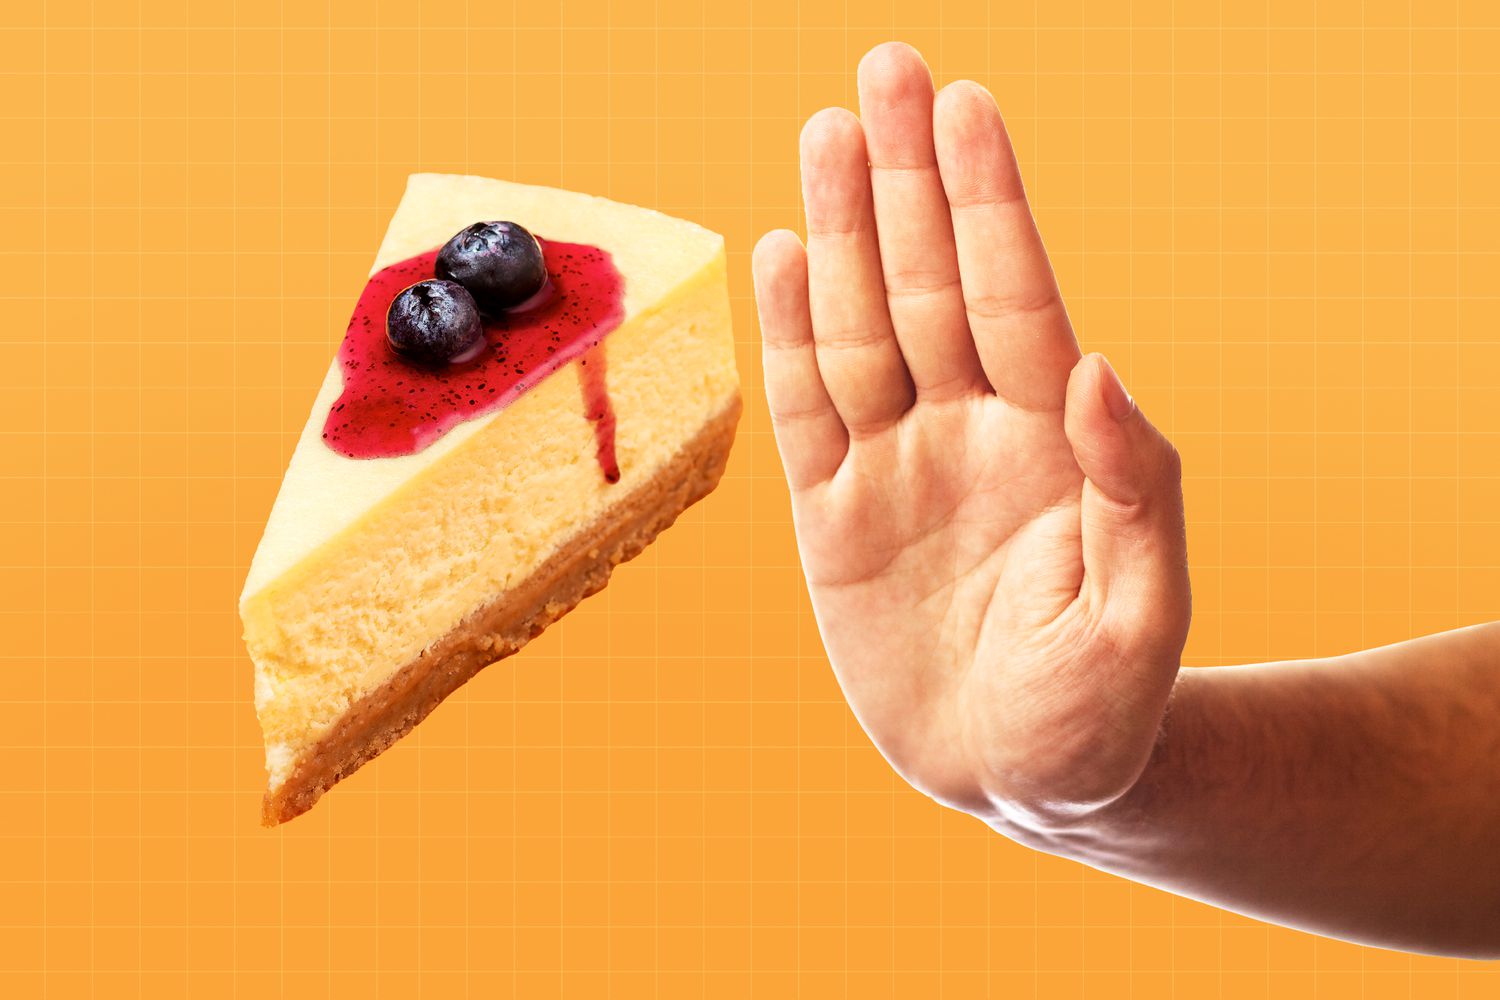 A hand in a stop position next to a slice of cheesecake